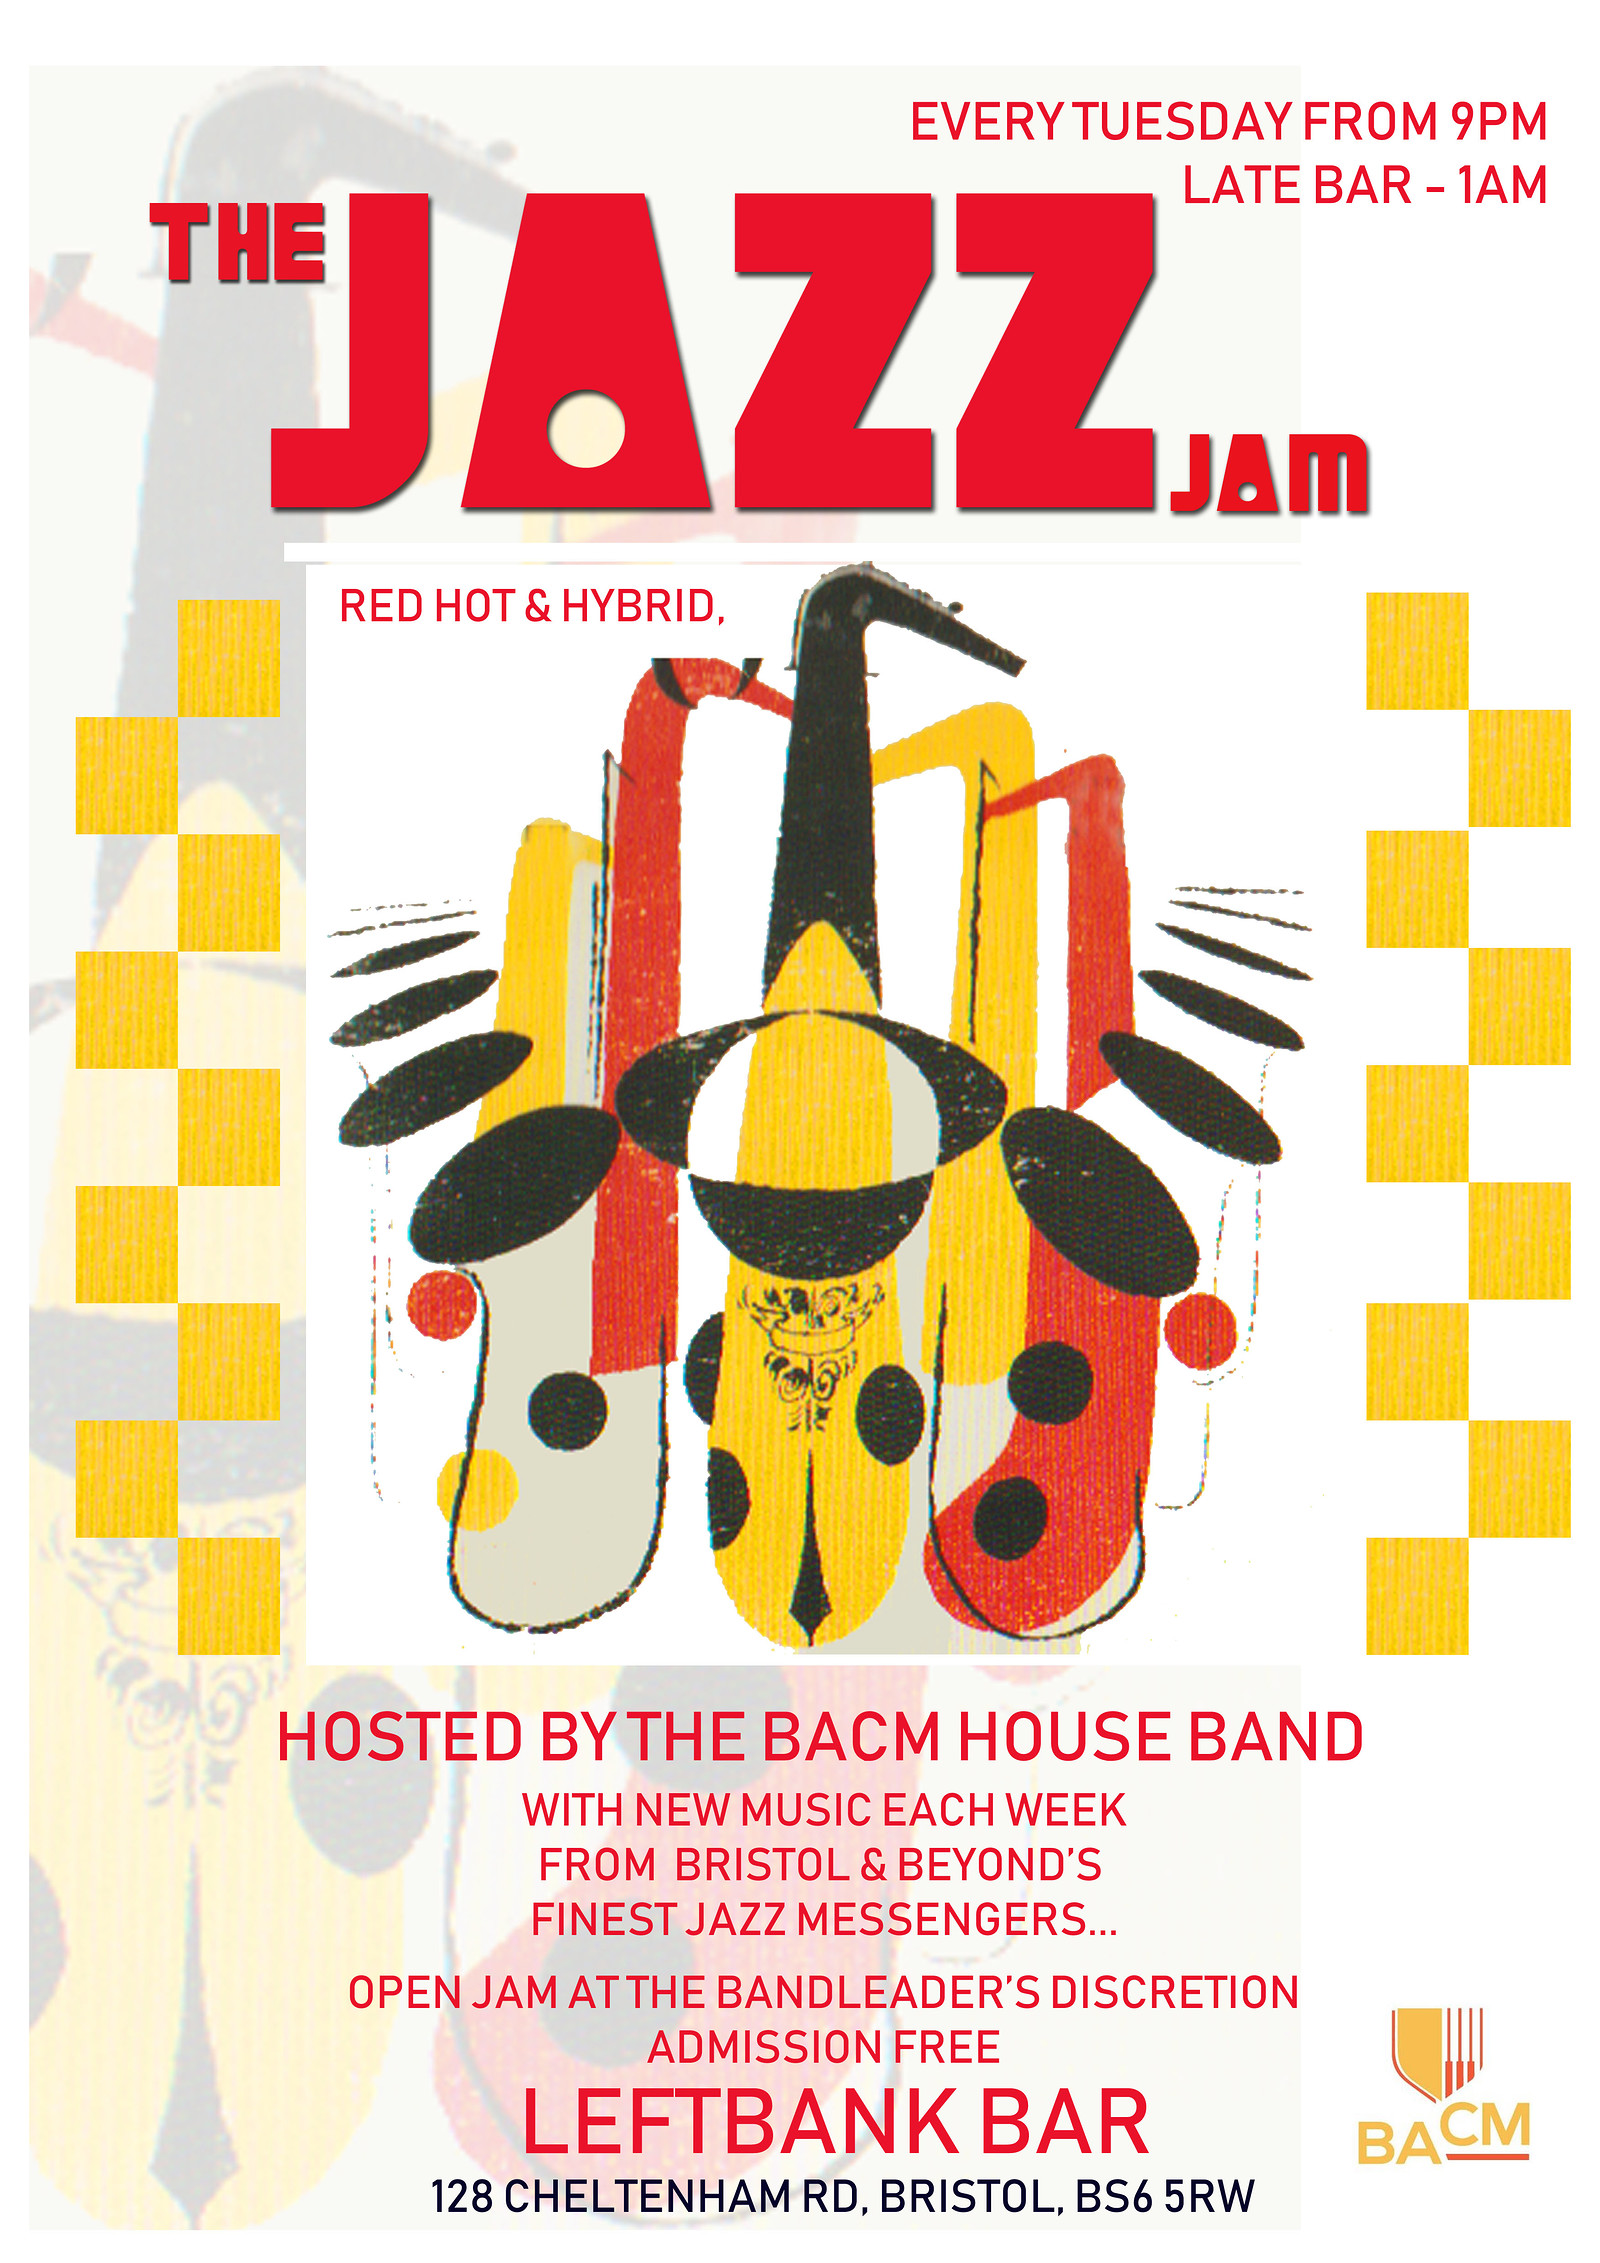 JAZZ JAM SESSION HOSTED BY THE BACM HOUSE BAND at LEFTBANK